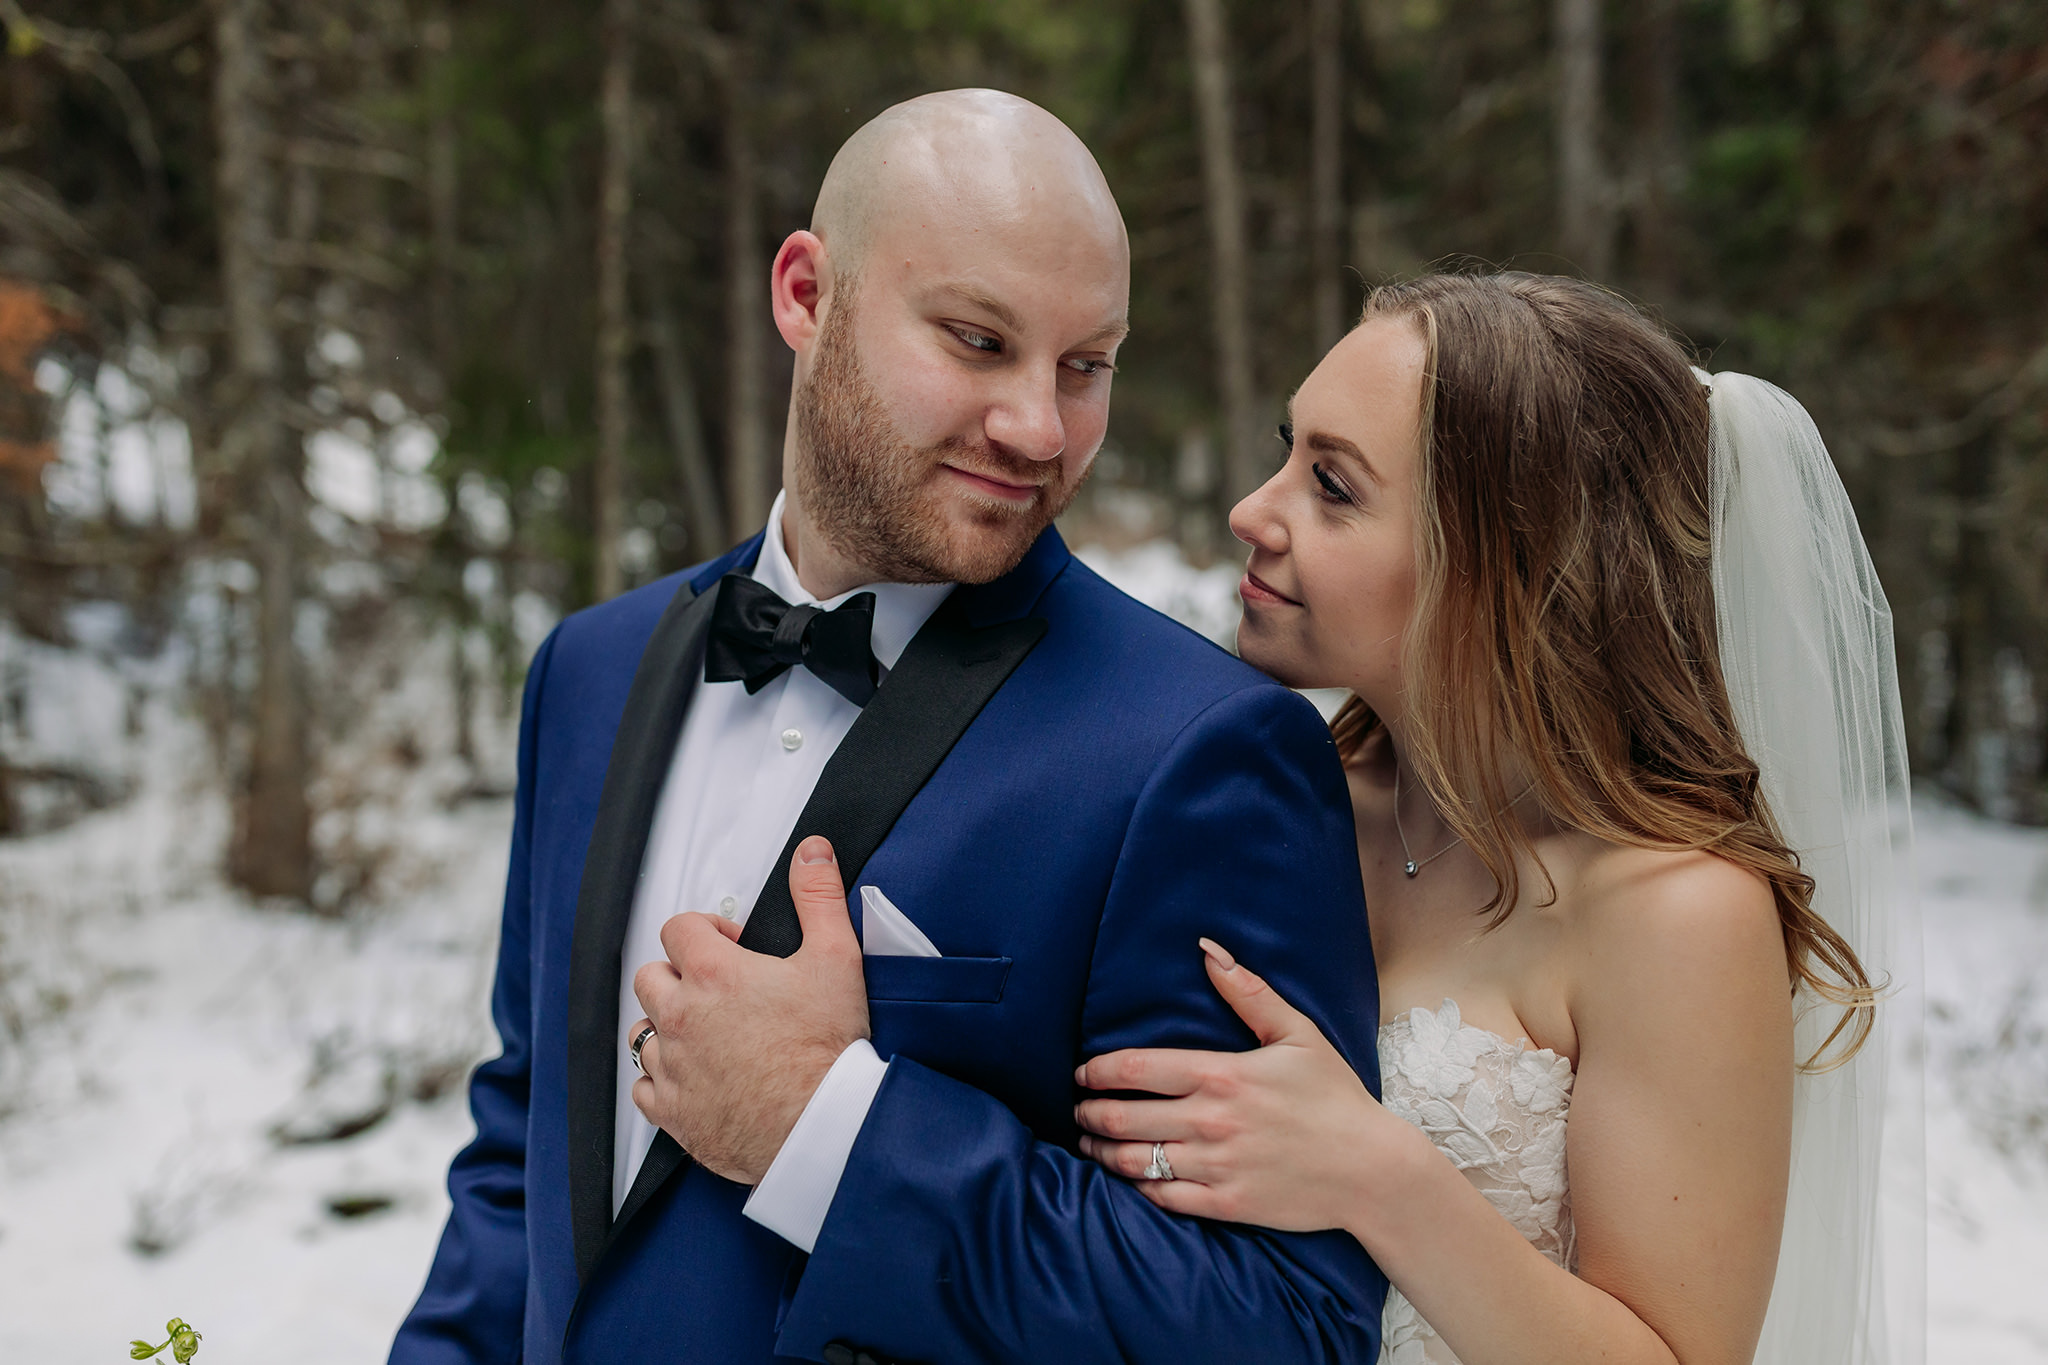 outdoor winter wedding at Lake Louise in the Canadian Rocky Mountains